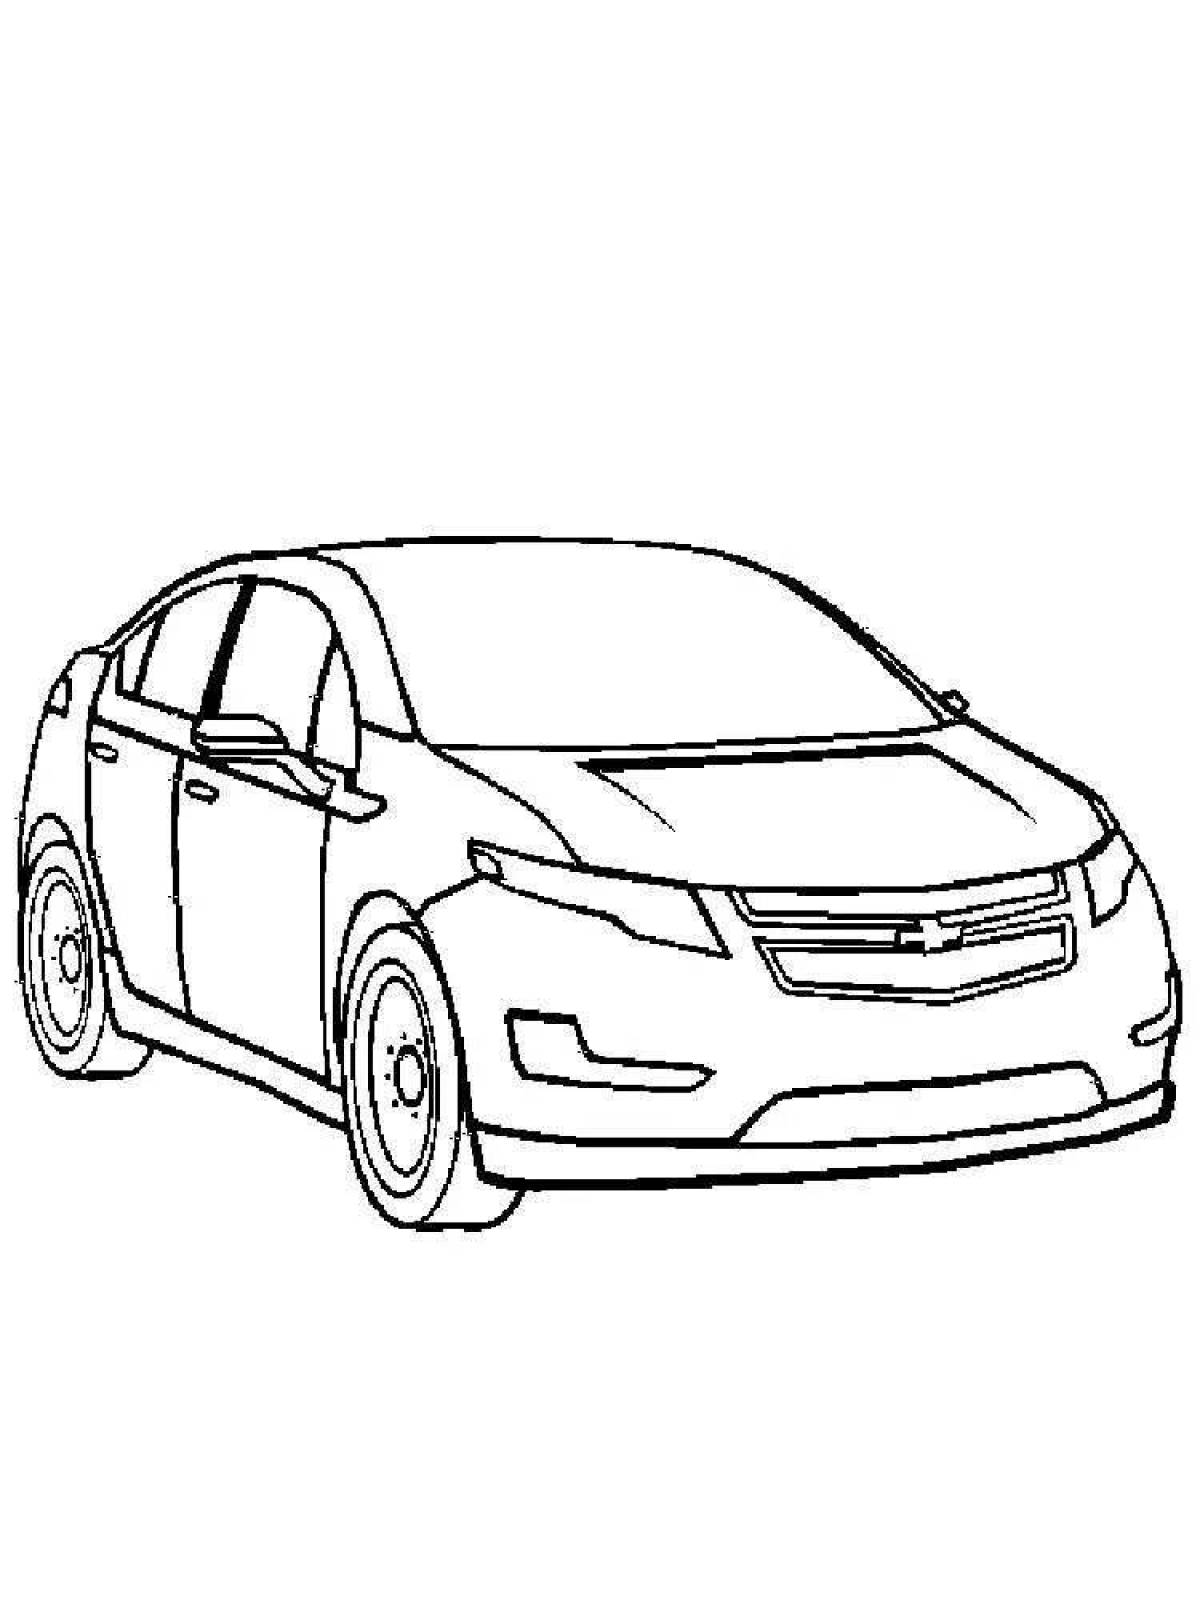 Chevrolet cruze exciting coloring